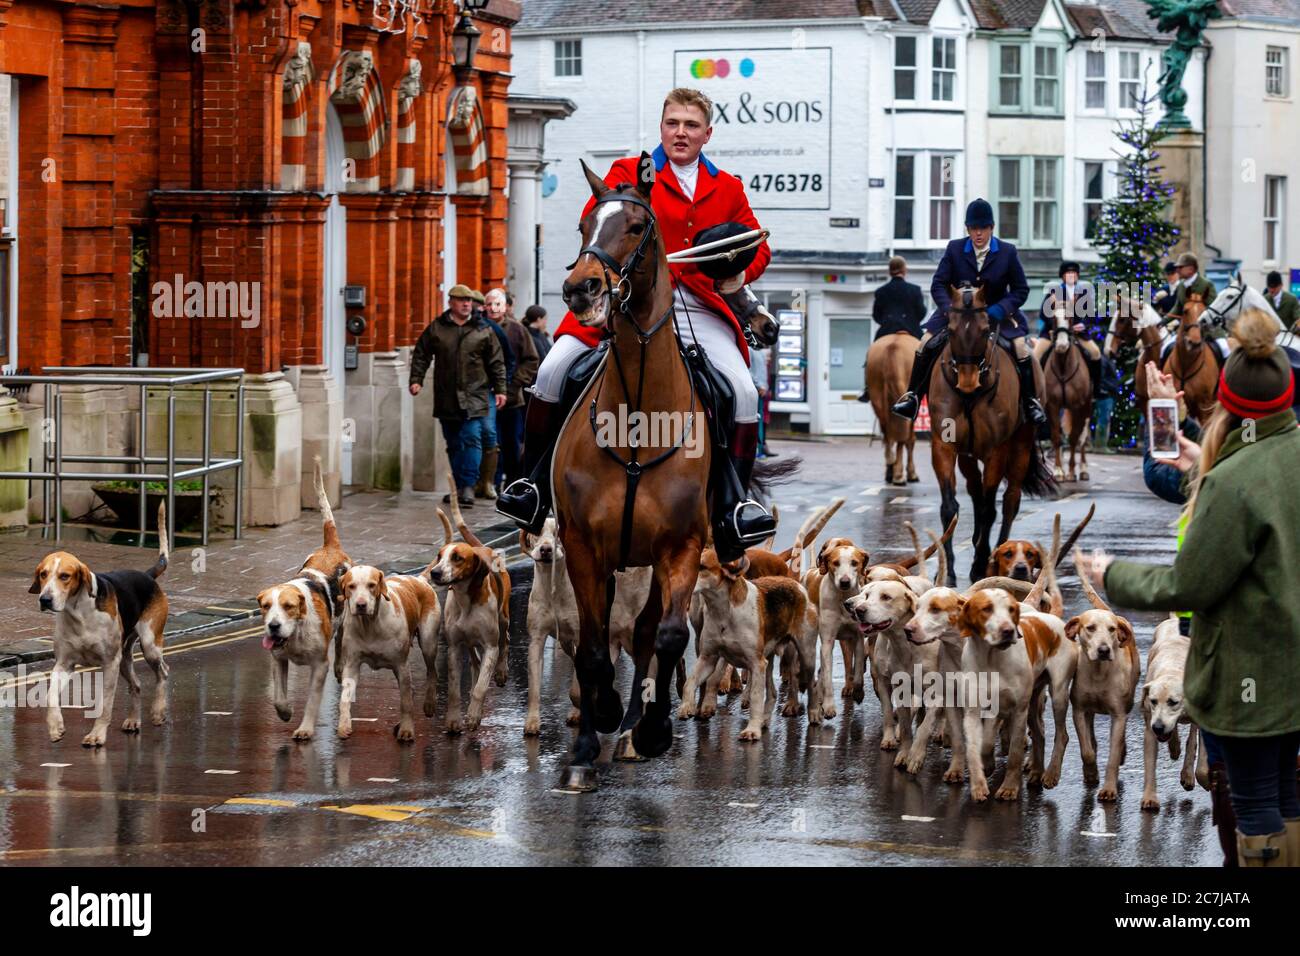 The Southdown and Eridge Hunt Arrive For Their Annual Boxing Day Meet, Lewes, East Sussex, UK Stock Photo